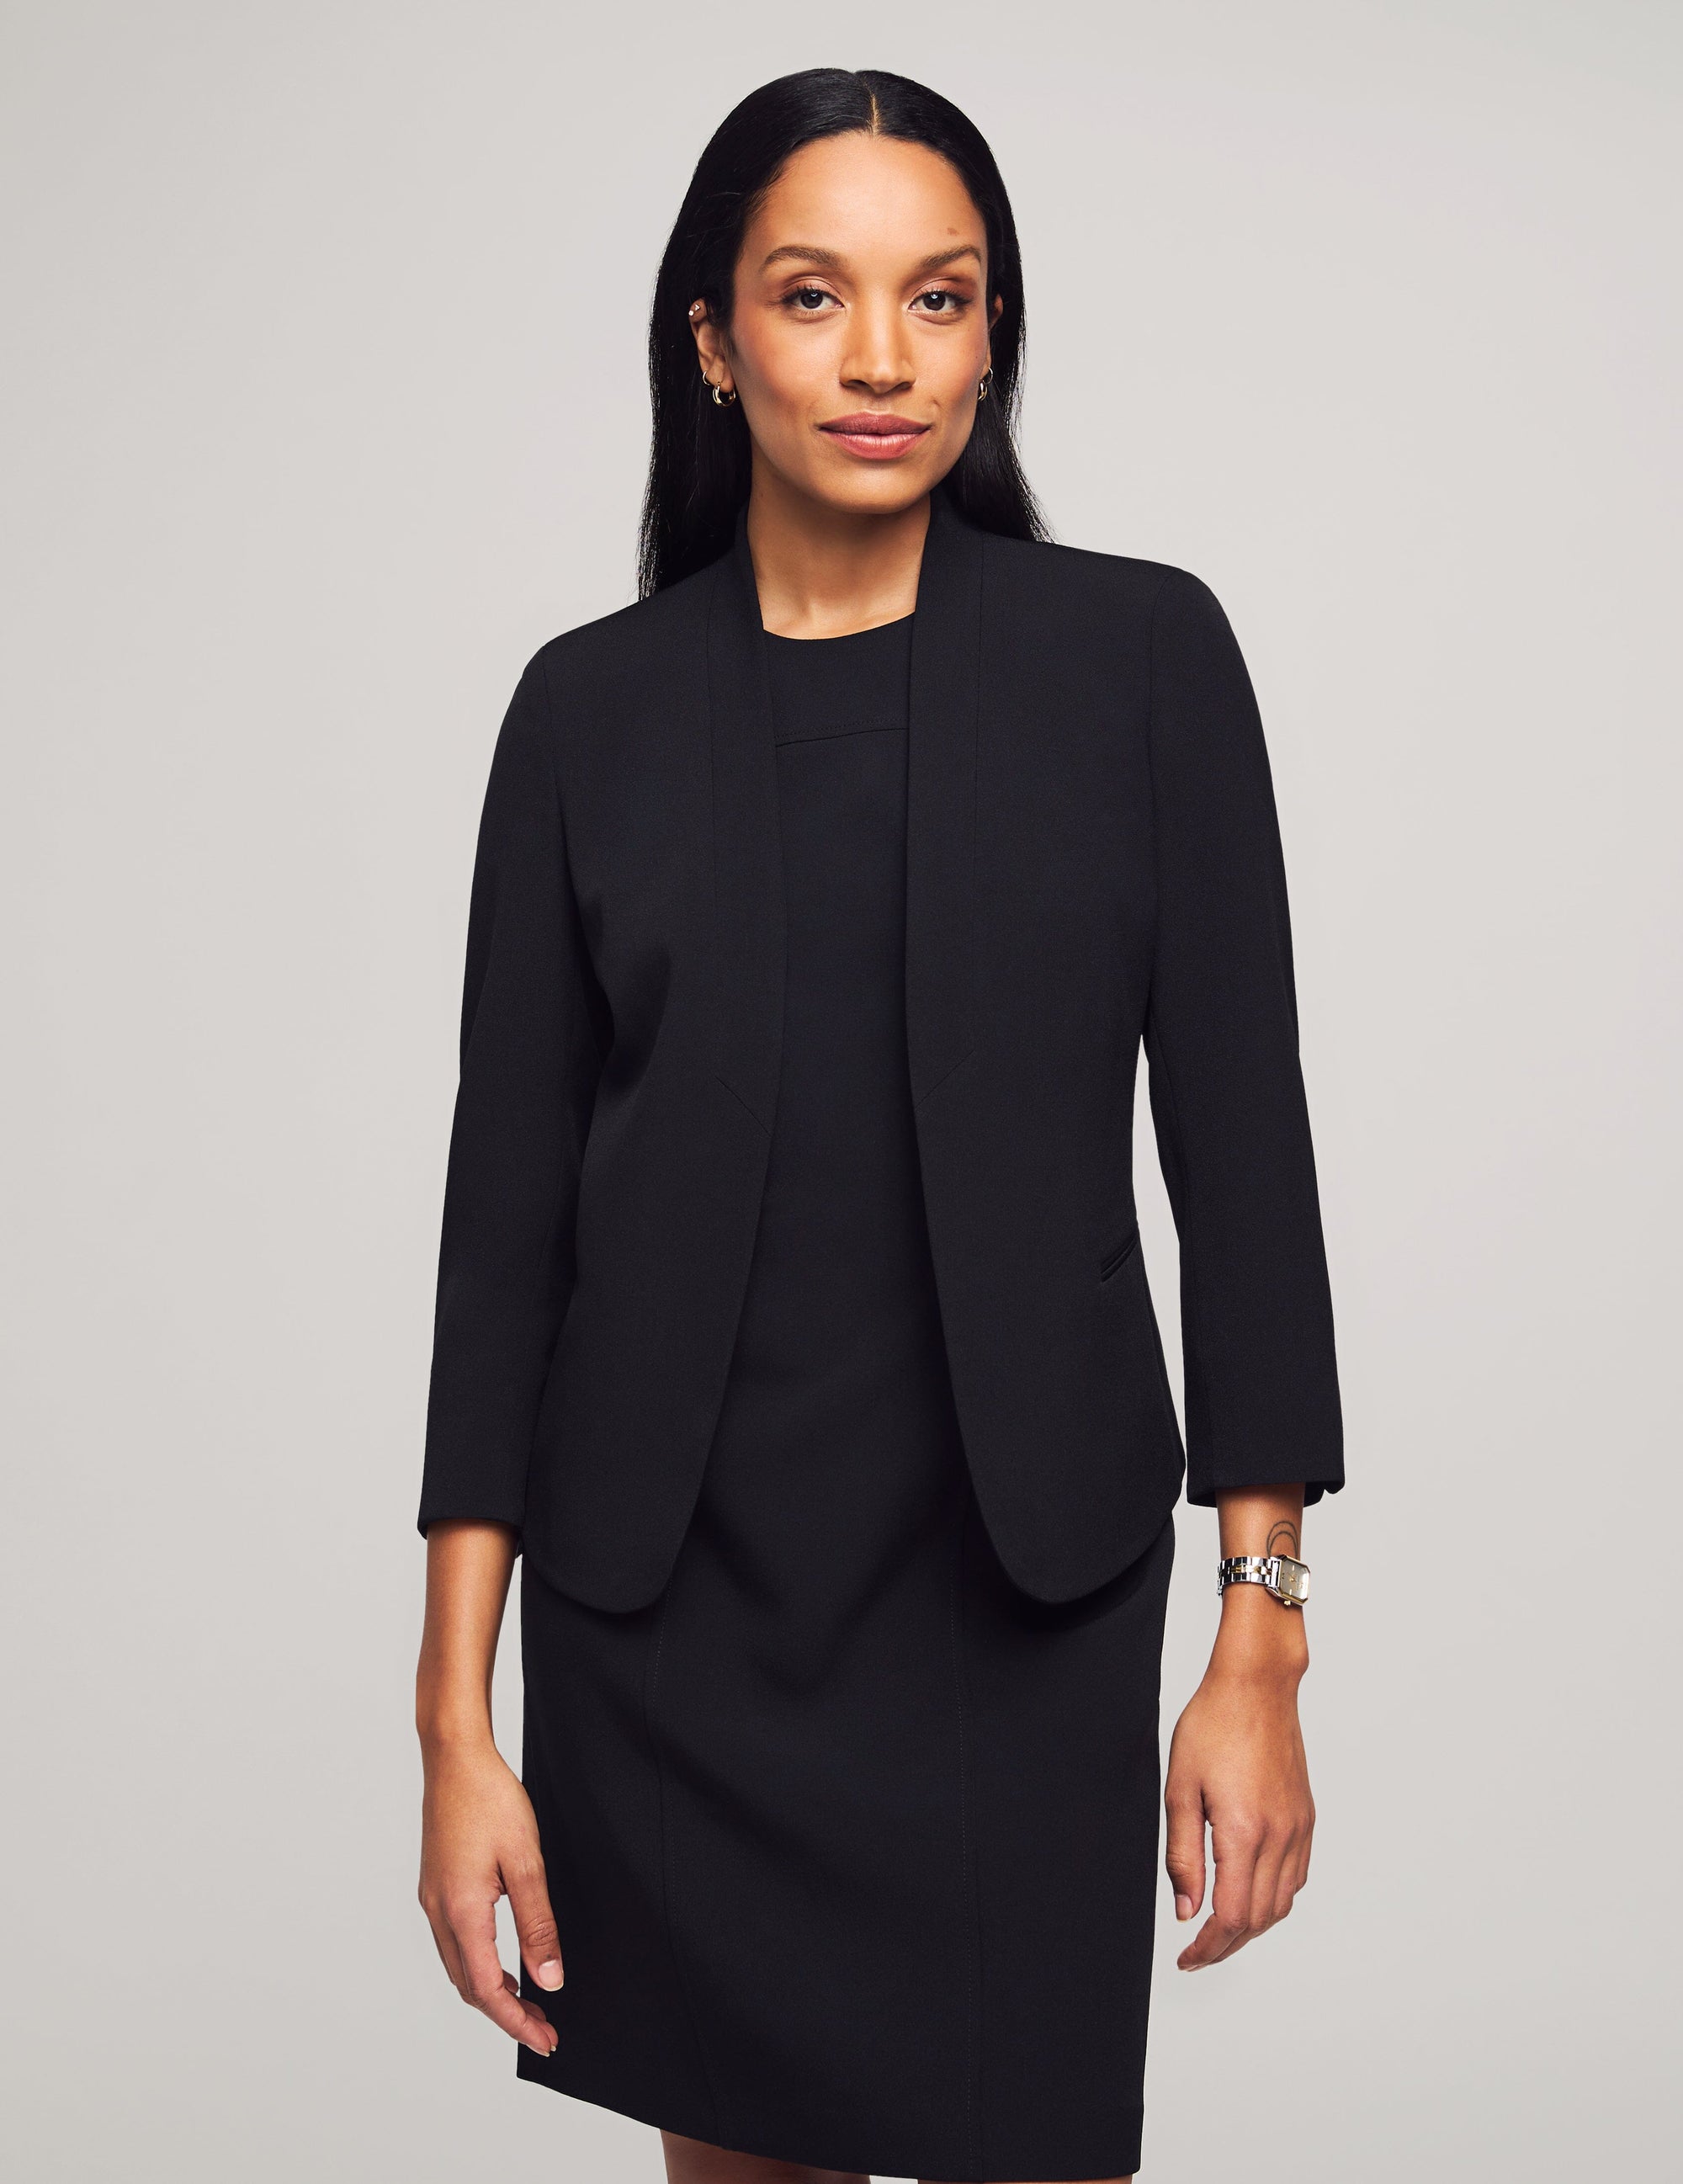 Anne Klein Black Executive Collection 2-Pc. Jacket and Dress Set